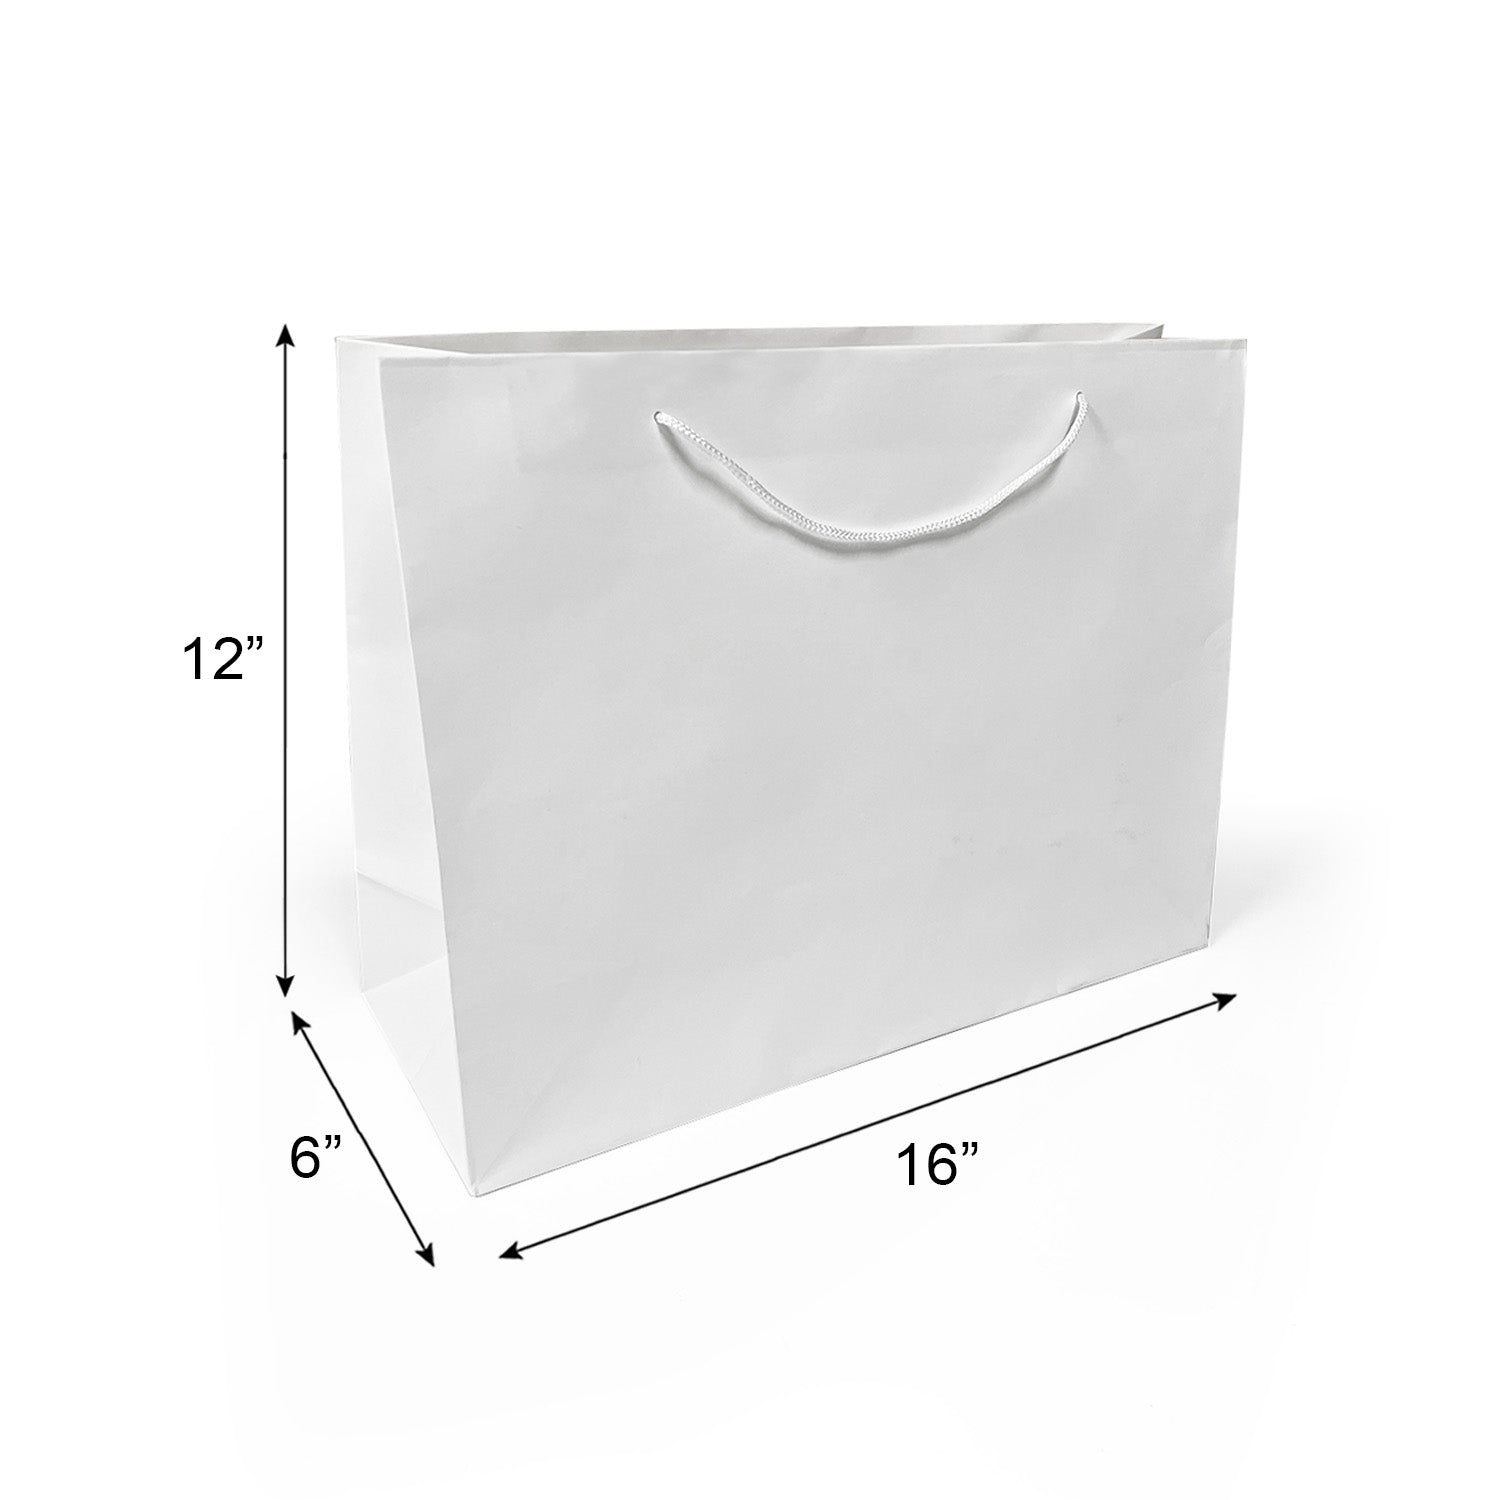 150 Pcs, Vogue,  16x6x12 inches, White Euro Tote Paper Bags, with Rope Handle